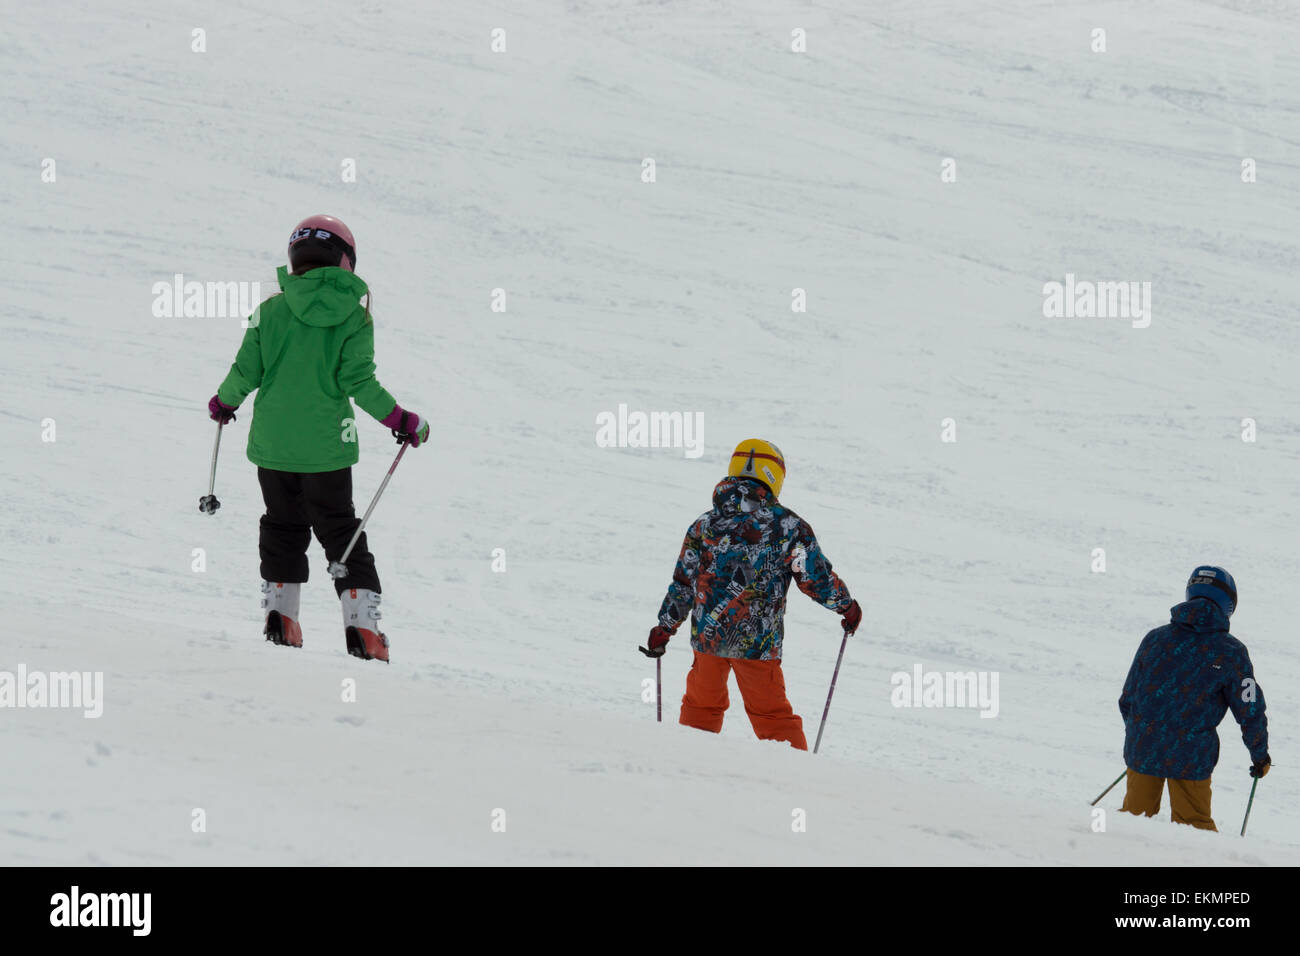 Three 3 friends following each other learning skiing Stock Photo